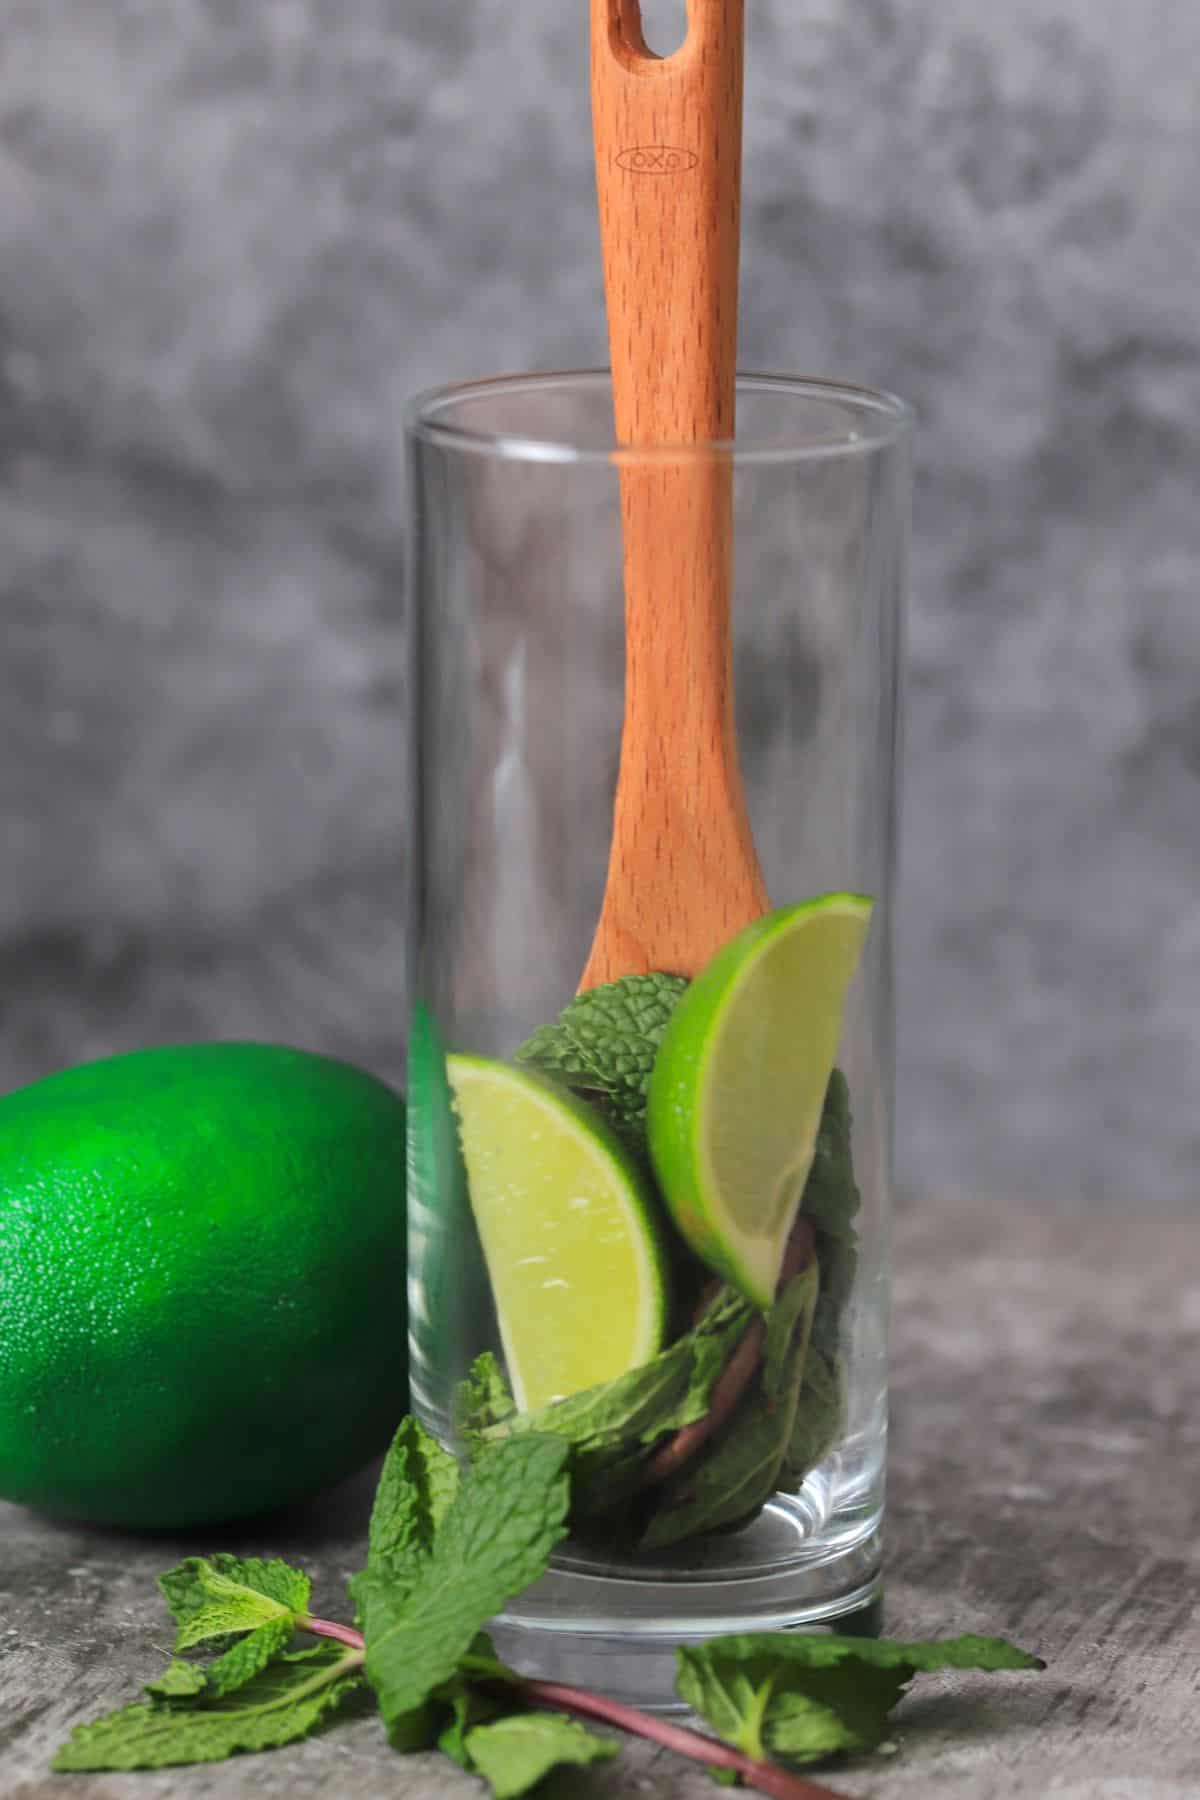 muddling the limes in a tall glass.